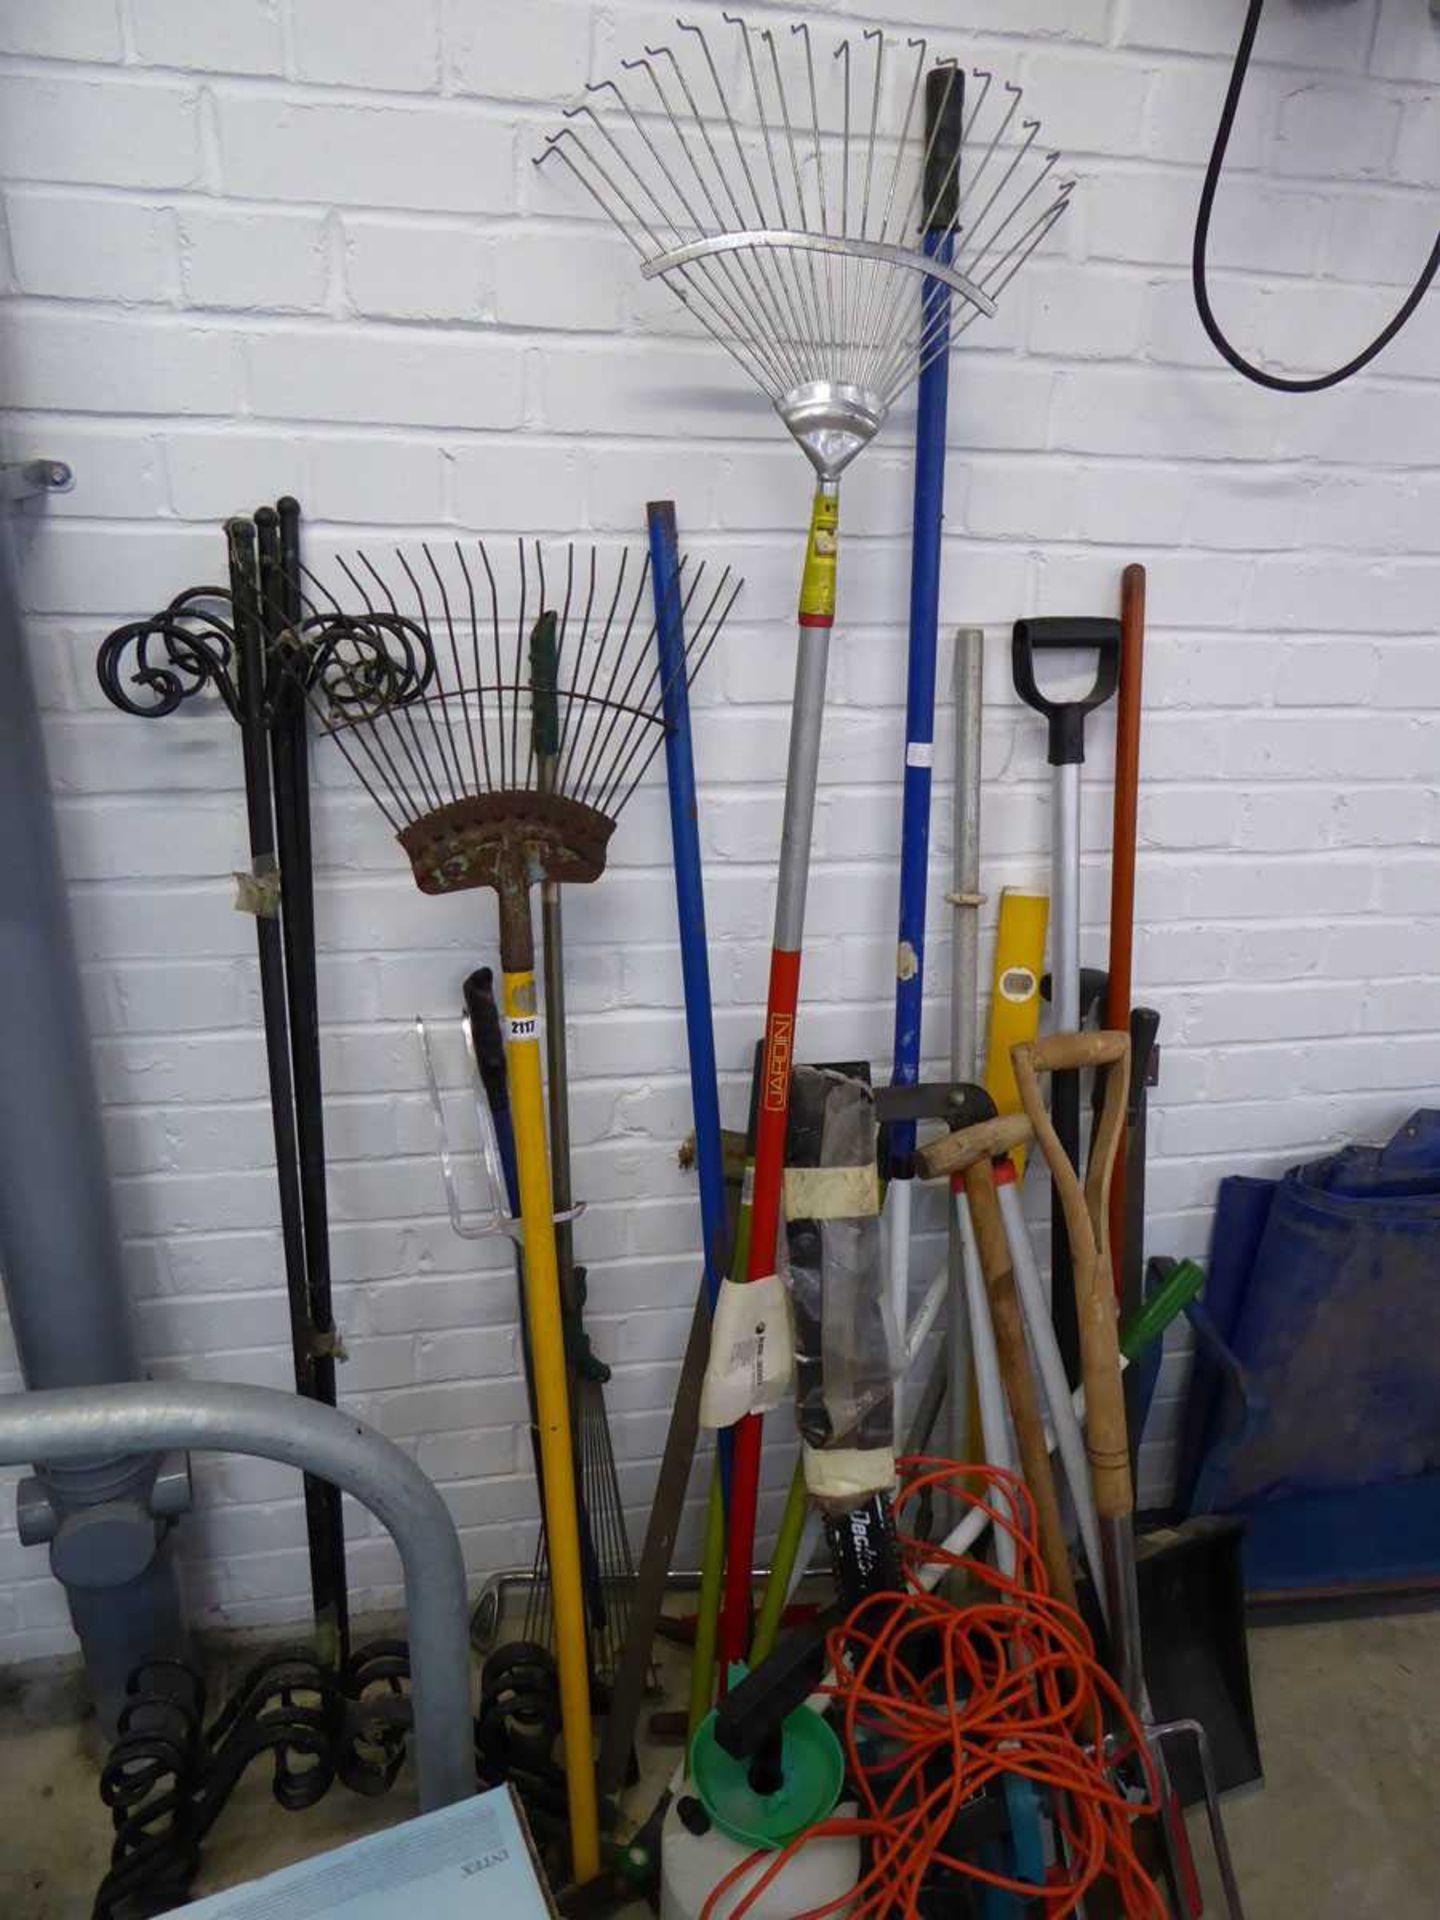 Large qty of outdoor garden hand tools to include rakes, forks, spades, pump sprayer etc - Image 2 of 3